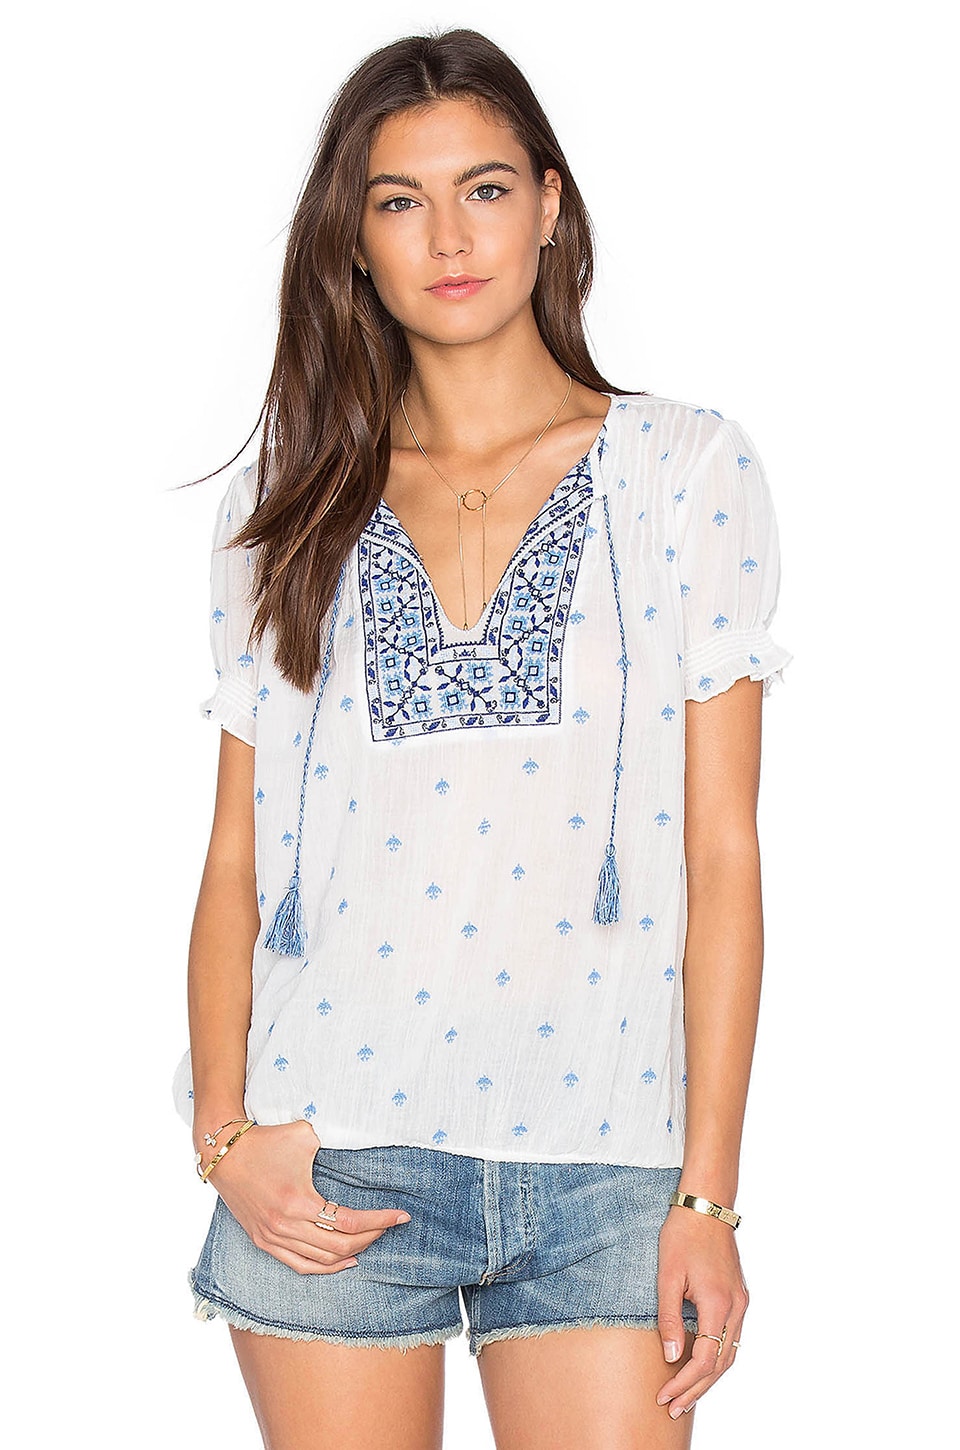 Joie Domingo Top in Porcelain & Shades of Blue | REVOLVE